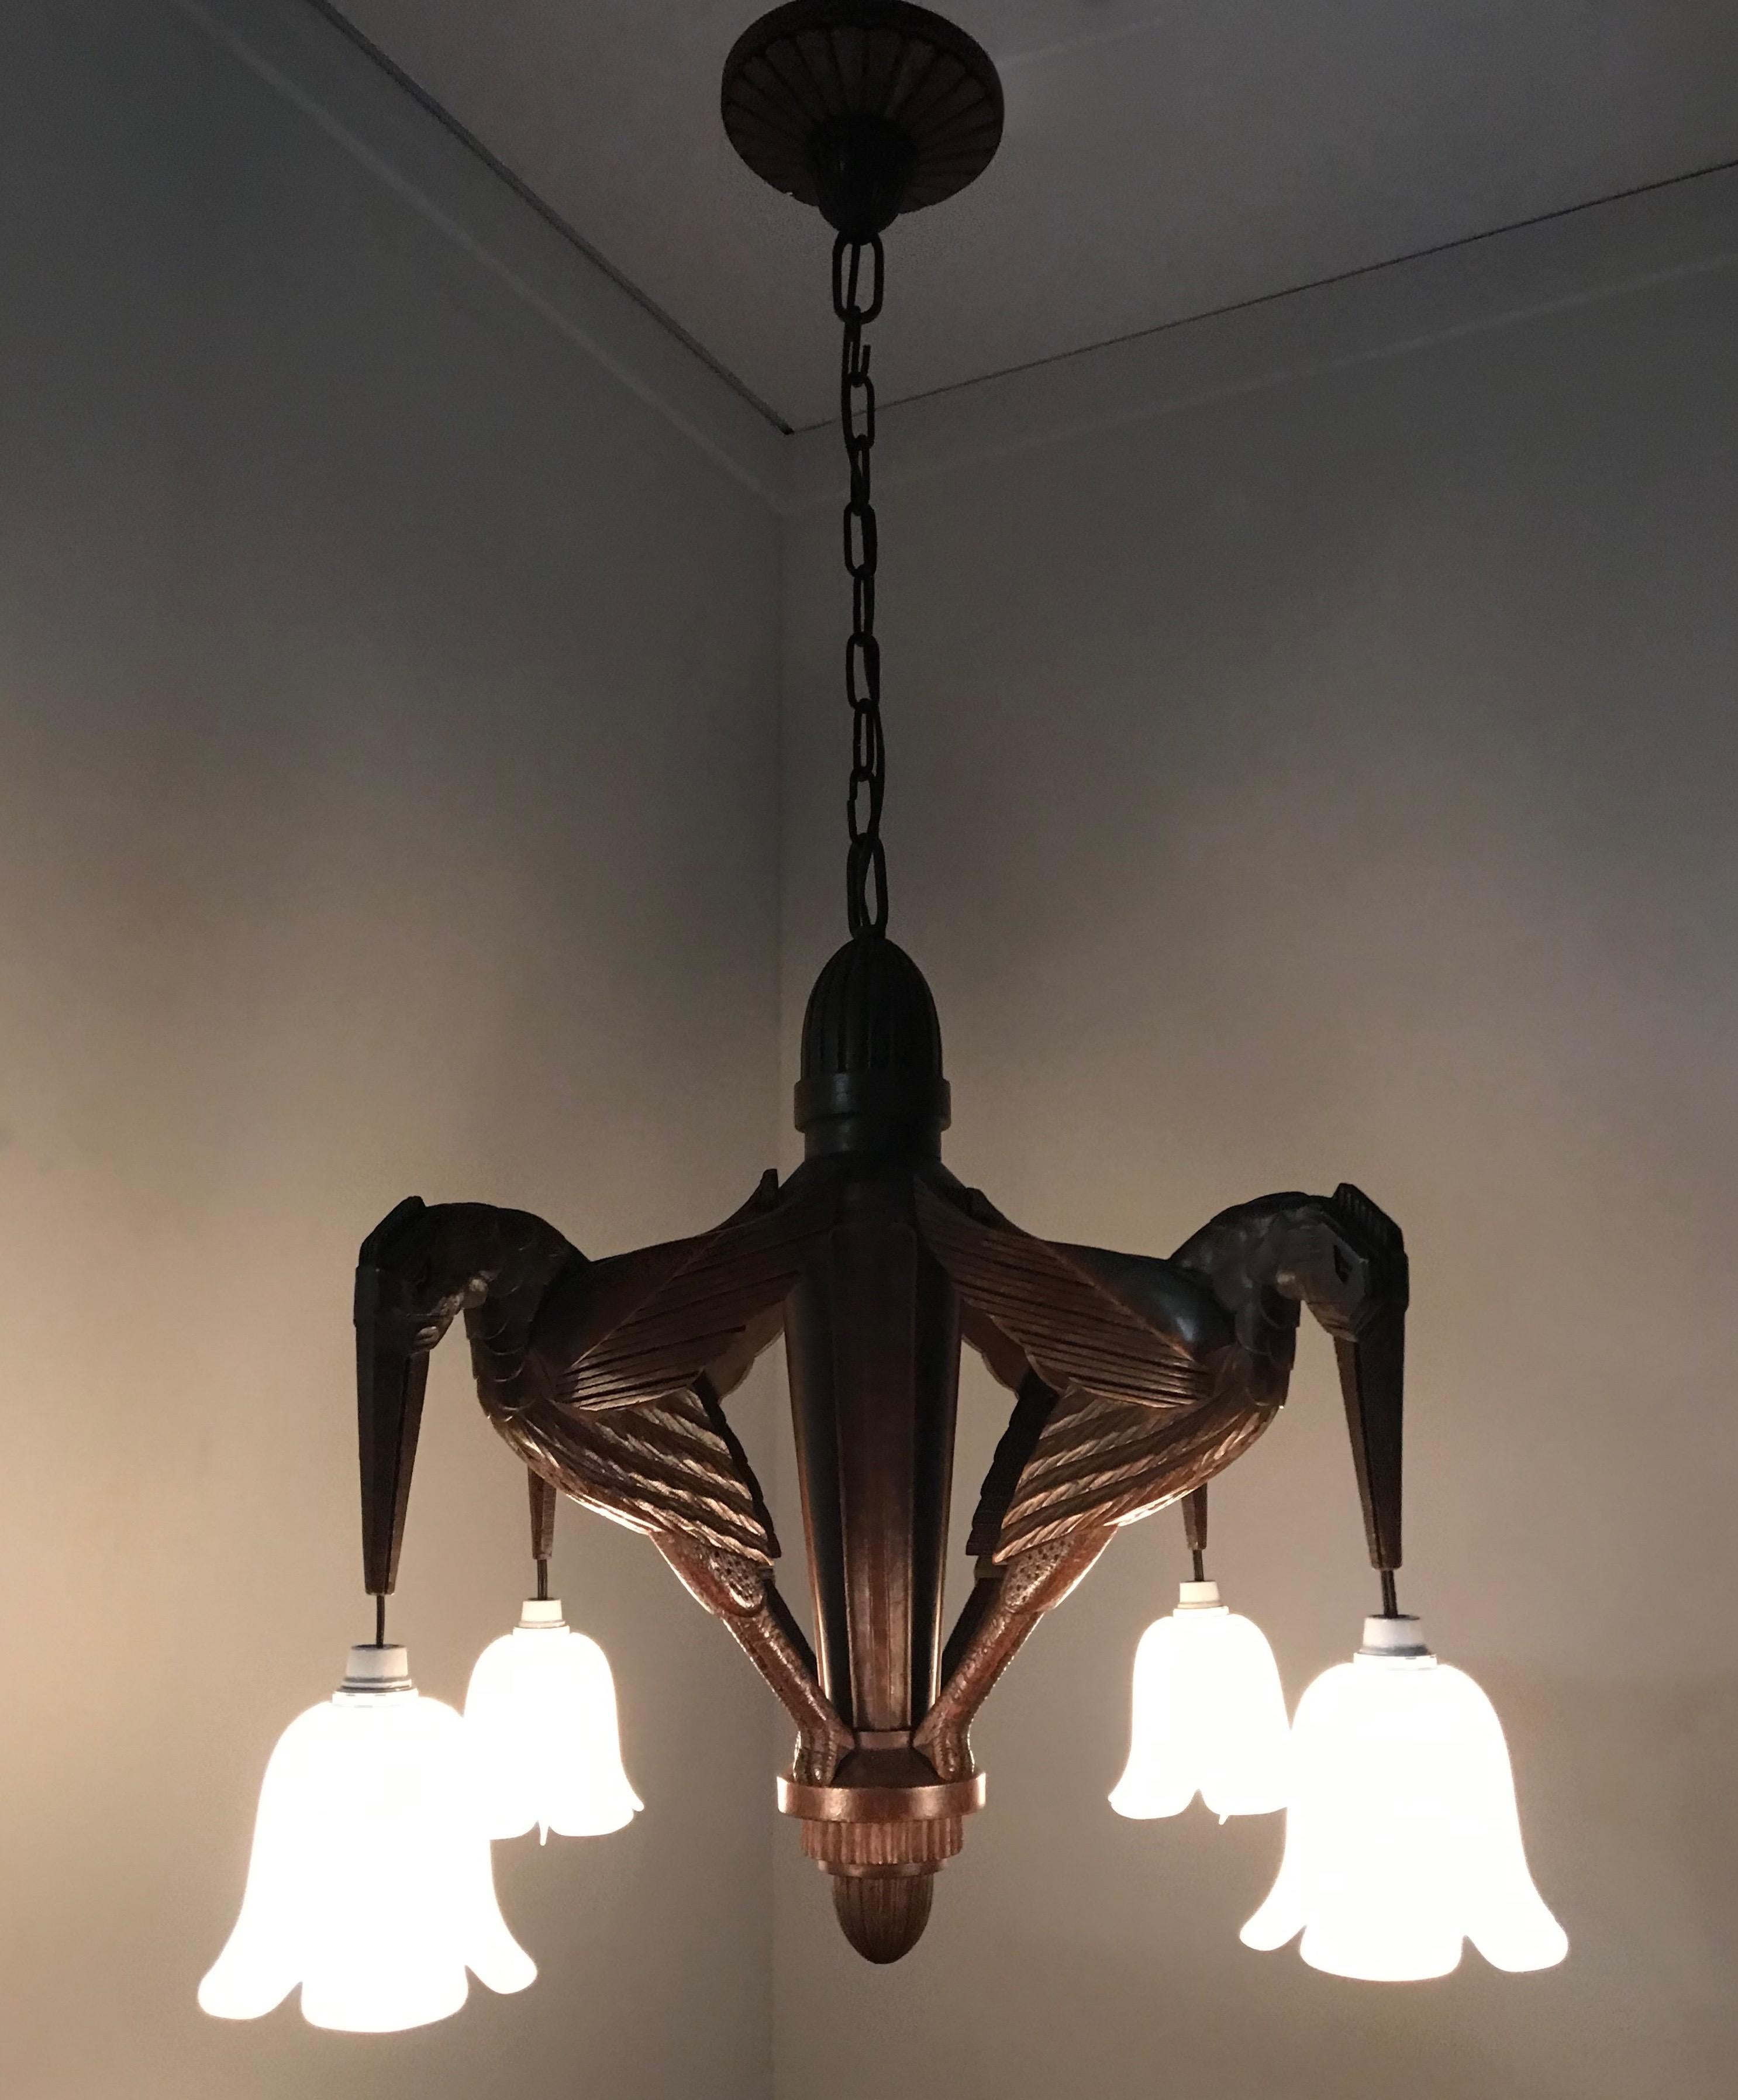 Hand-Carved Amazing Hand Carved Art Deco Chandelier / Pendant Light w. Stylish Humming Birds